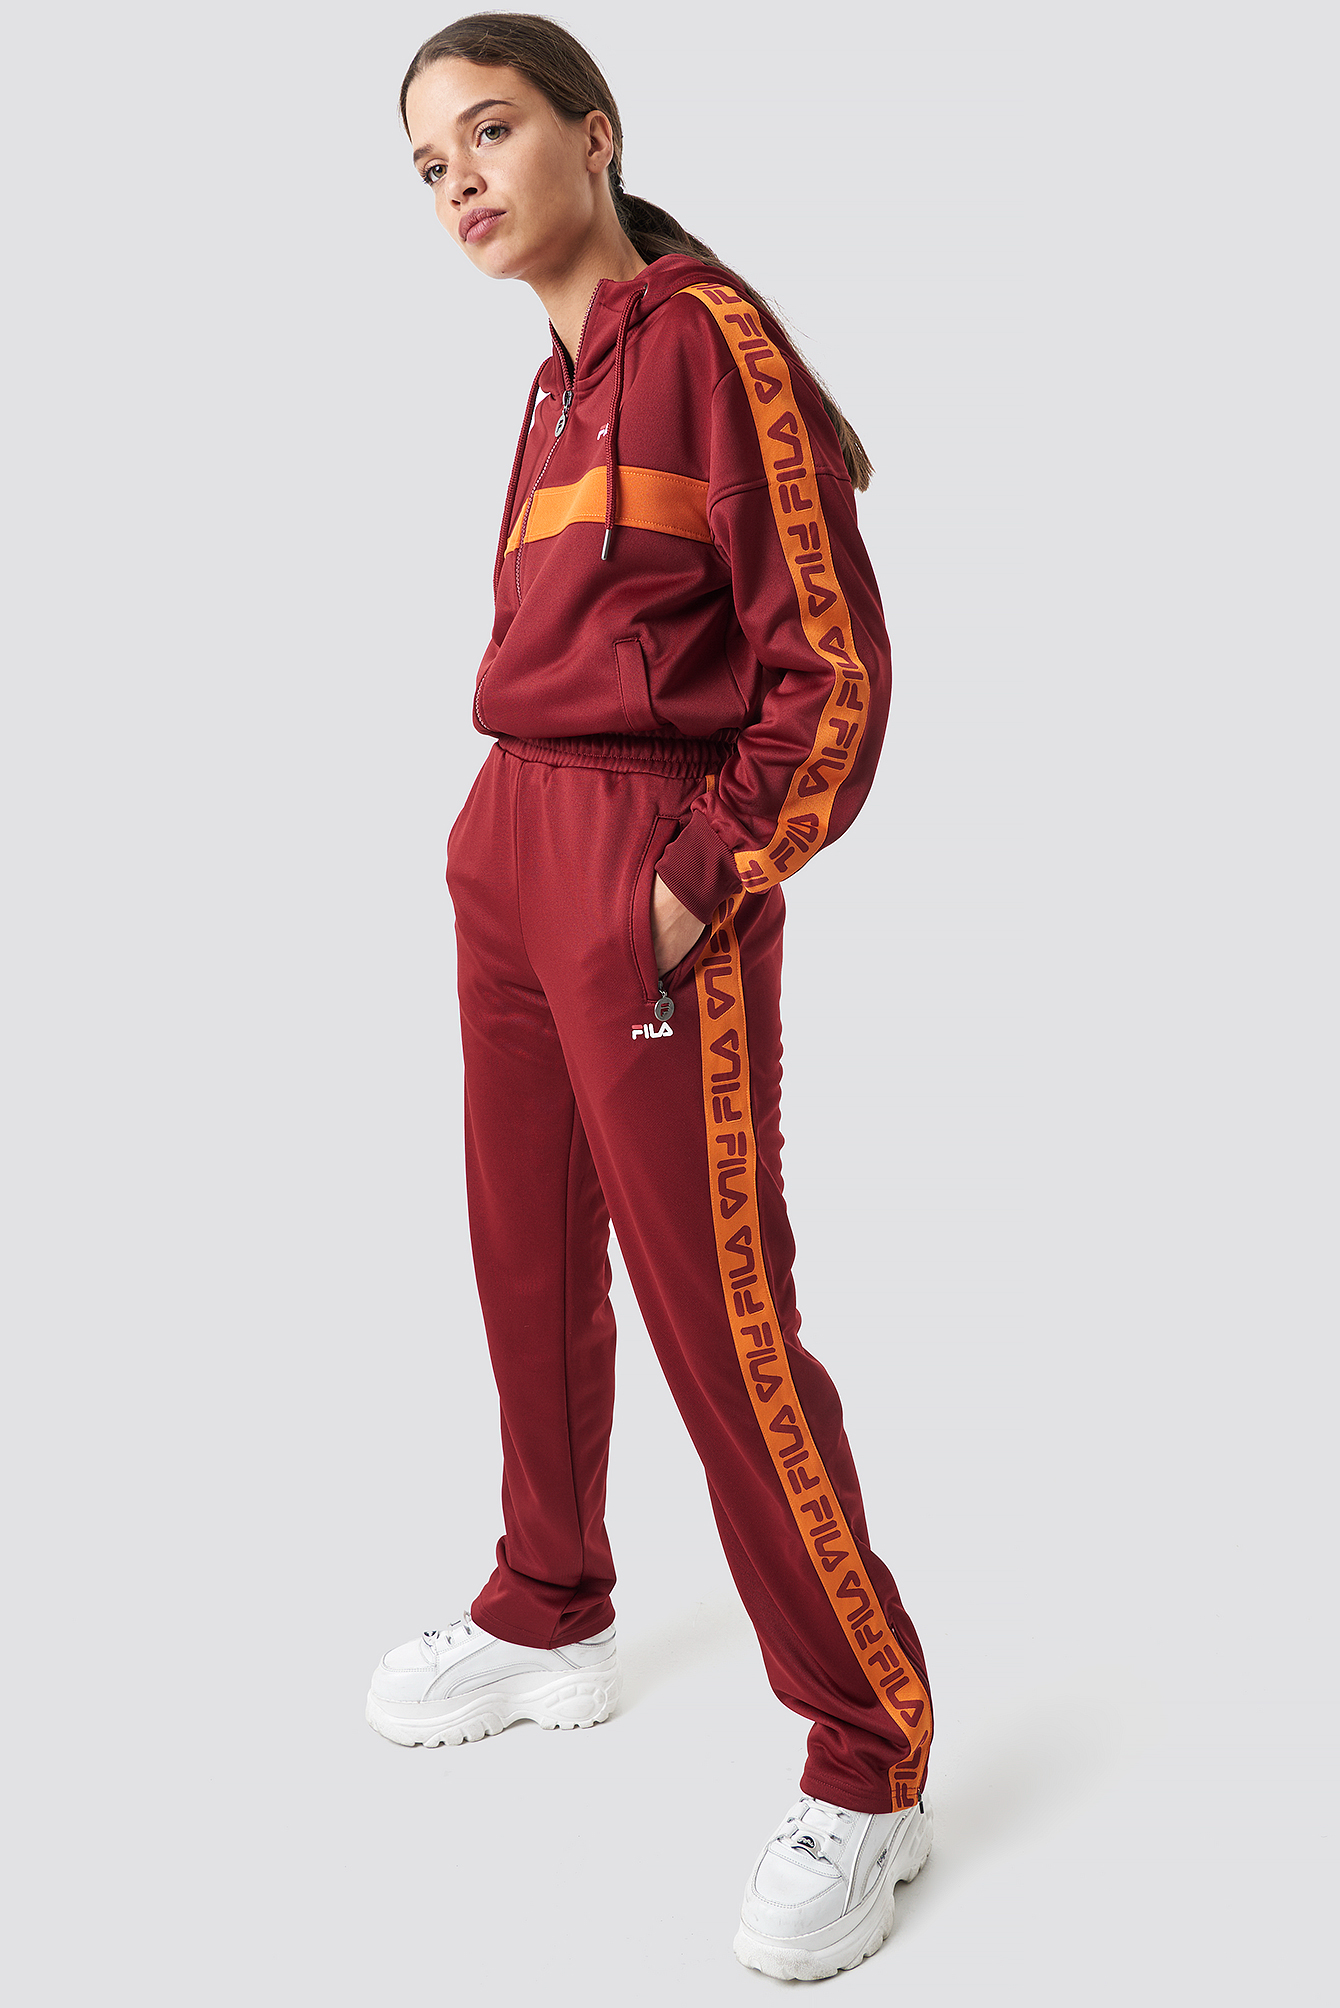 Fila Thora Track Pants - Red Https://www.na-kd.com/poqcolorimages/red.png X-Small,Small,Medium,Large